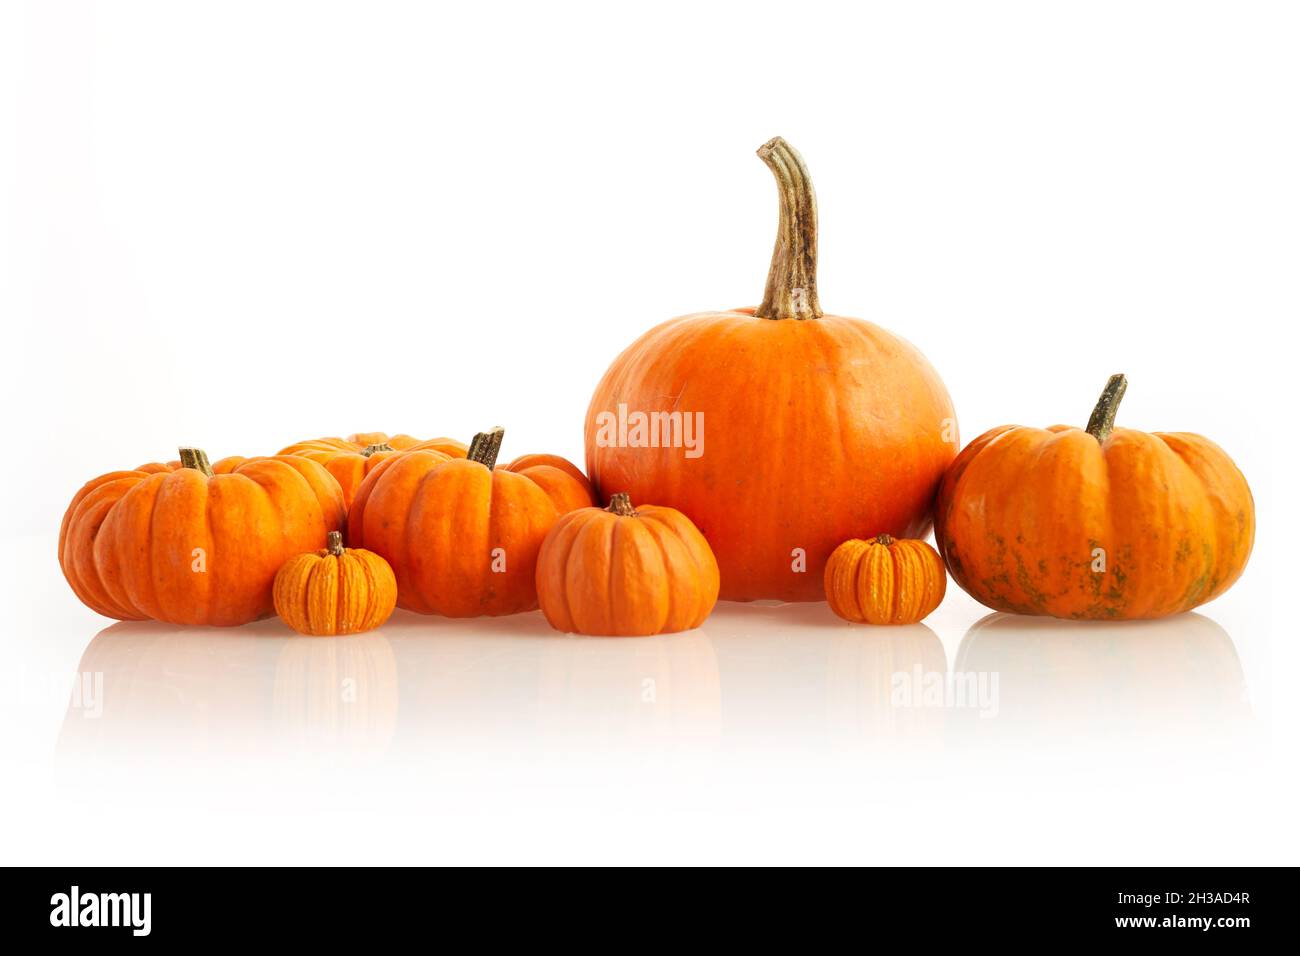 Orange pumpkins standing in line on white background. Front view Stock Photo